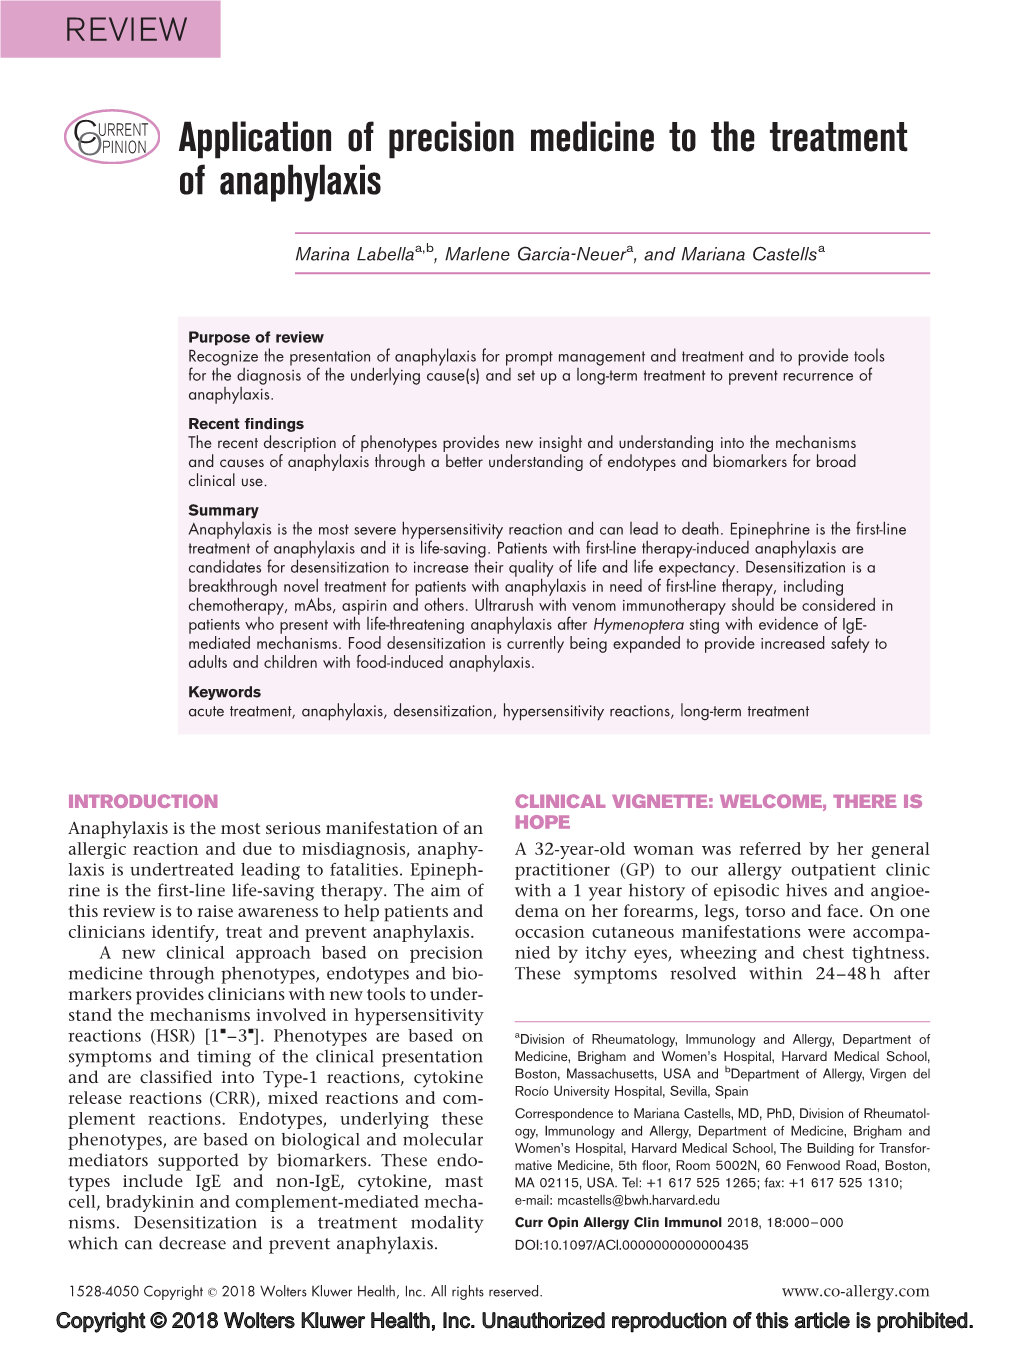 Application of Precision Medicine to the Treatment of Anaphylaxis